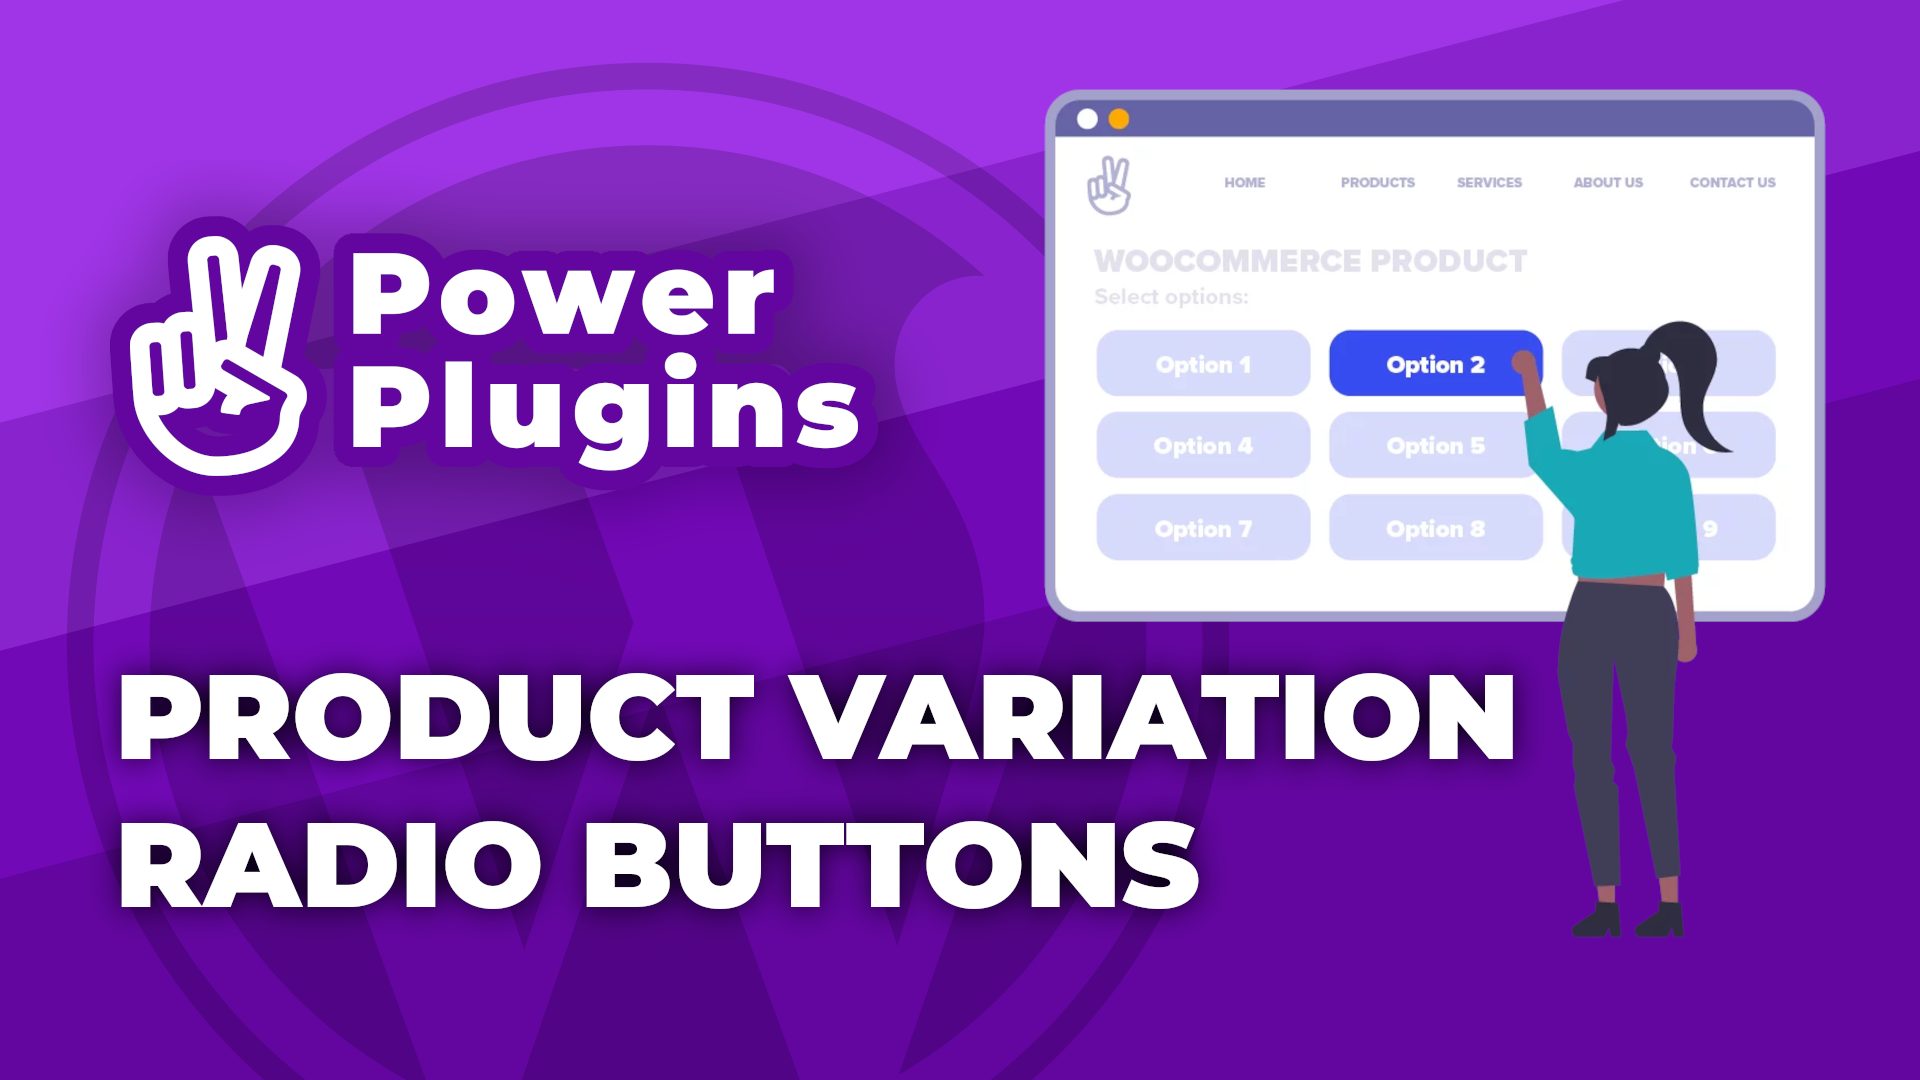 Power Plugins Product Variation Radio Buttons